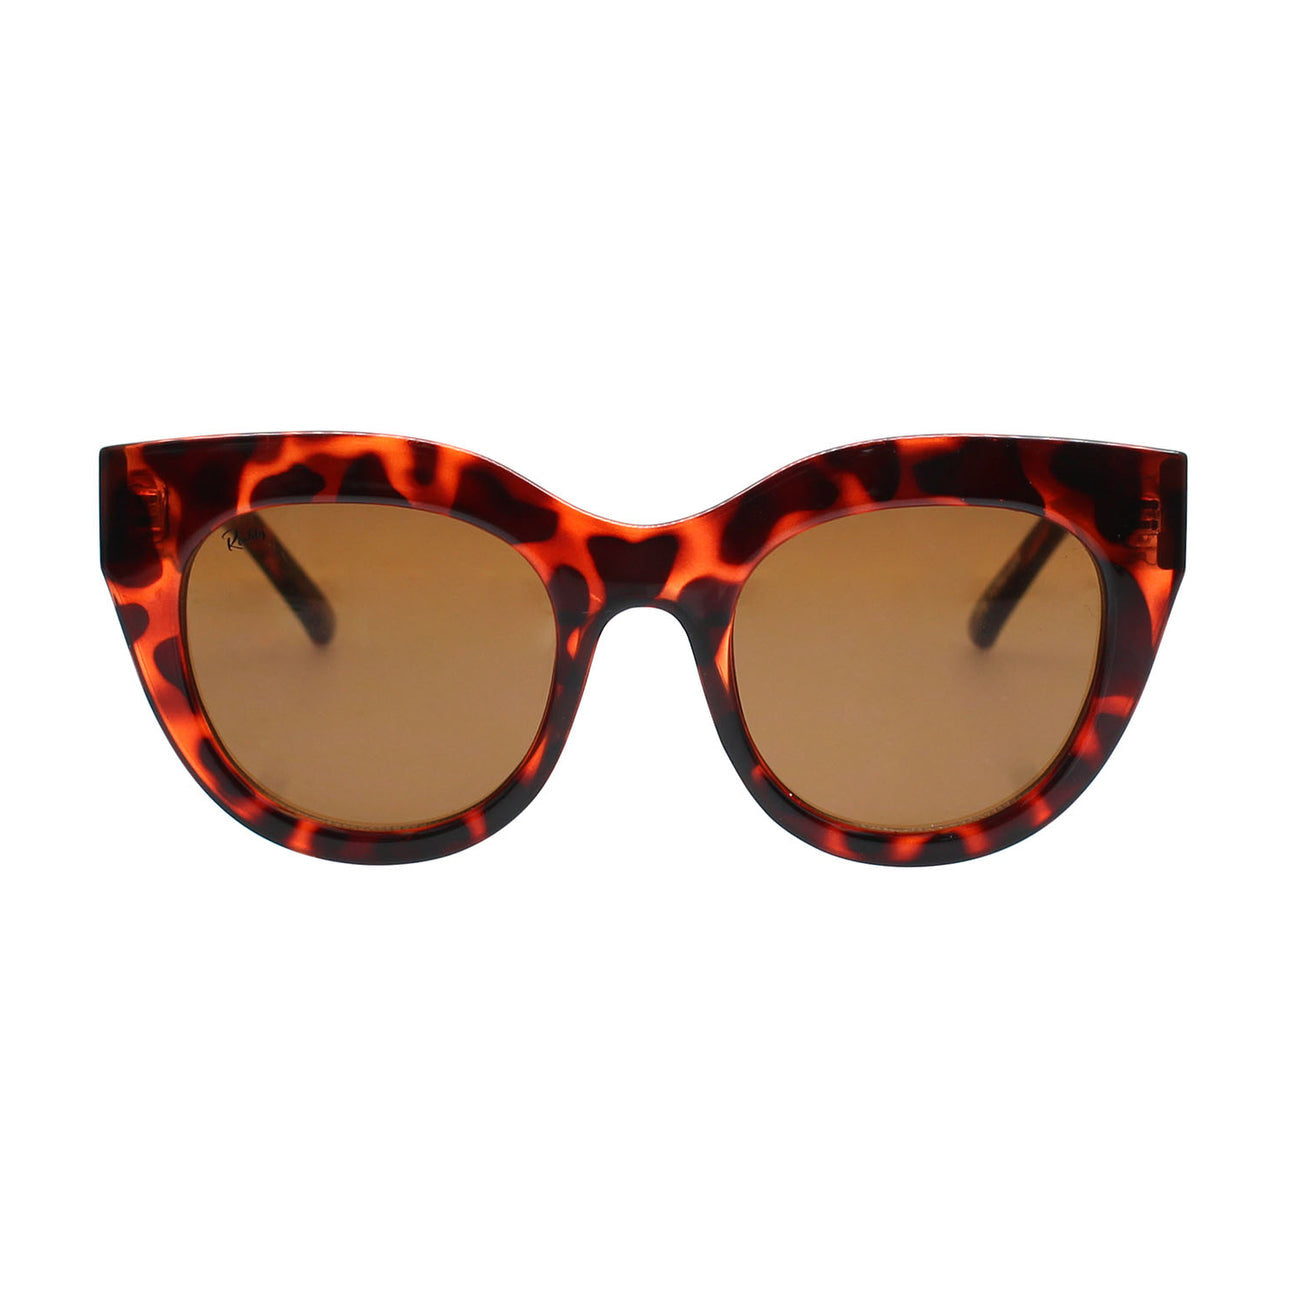 THE FOREVER SUNGLASSES - TURTLE - REALITY - Gaudy & Prim